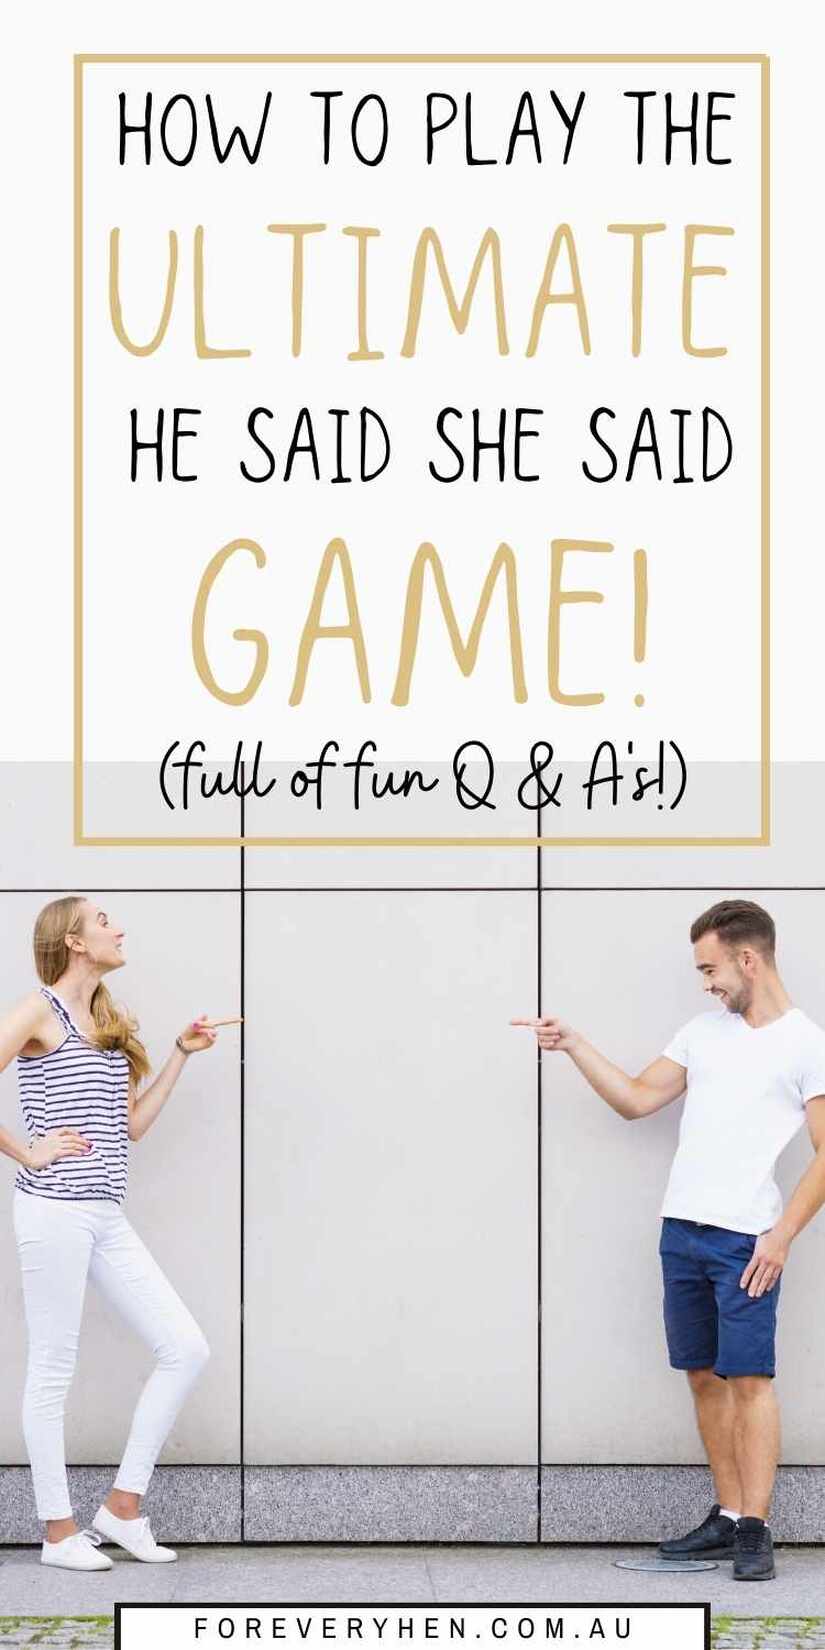 A couple smiling and pointing at each other. Text overlay: How to play the ultimate he said she said game! (full of fun Q & A's!)